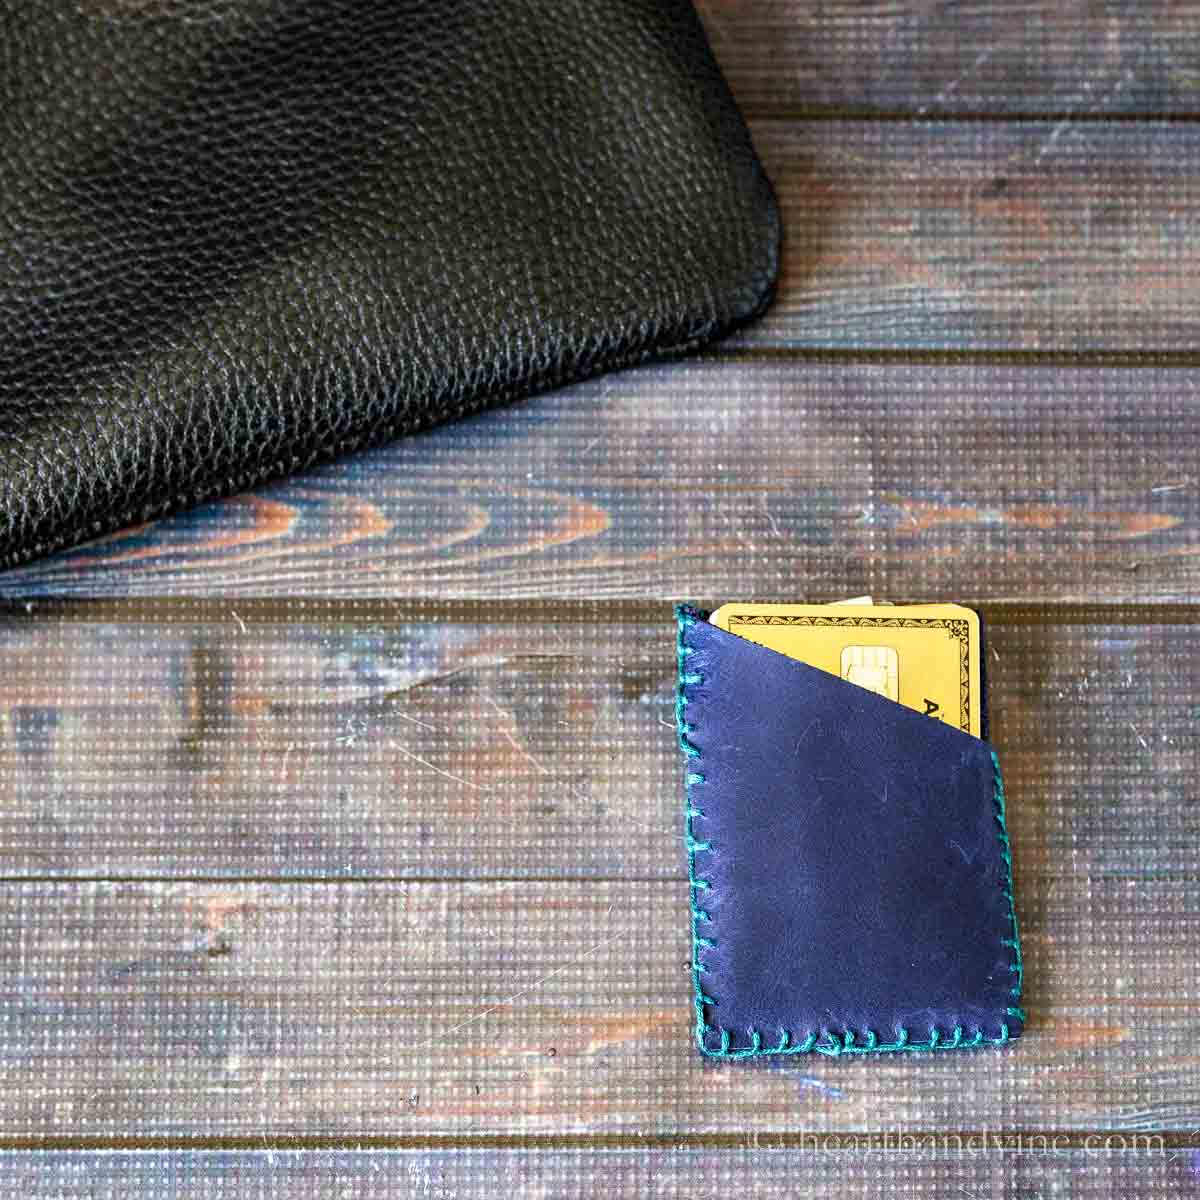 Leather card holder next to a small black purse.